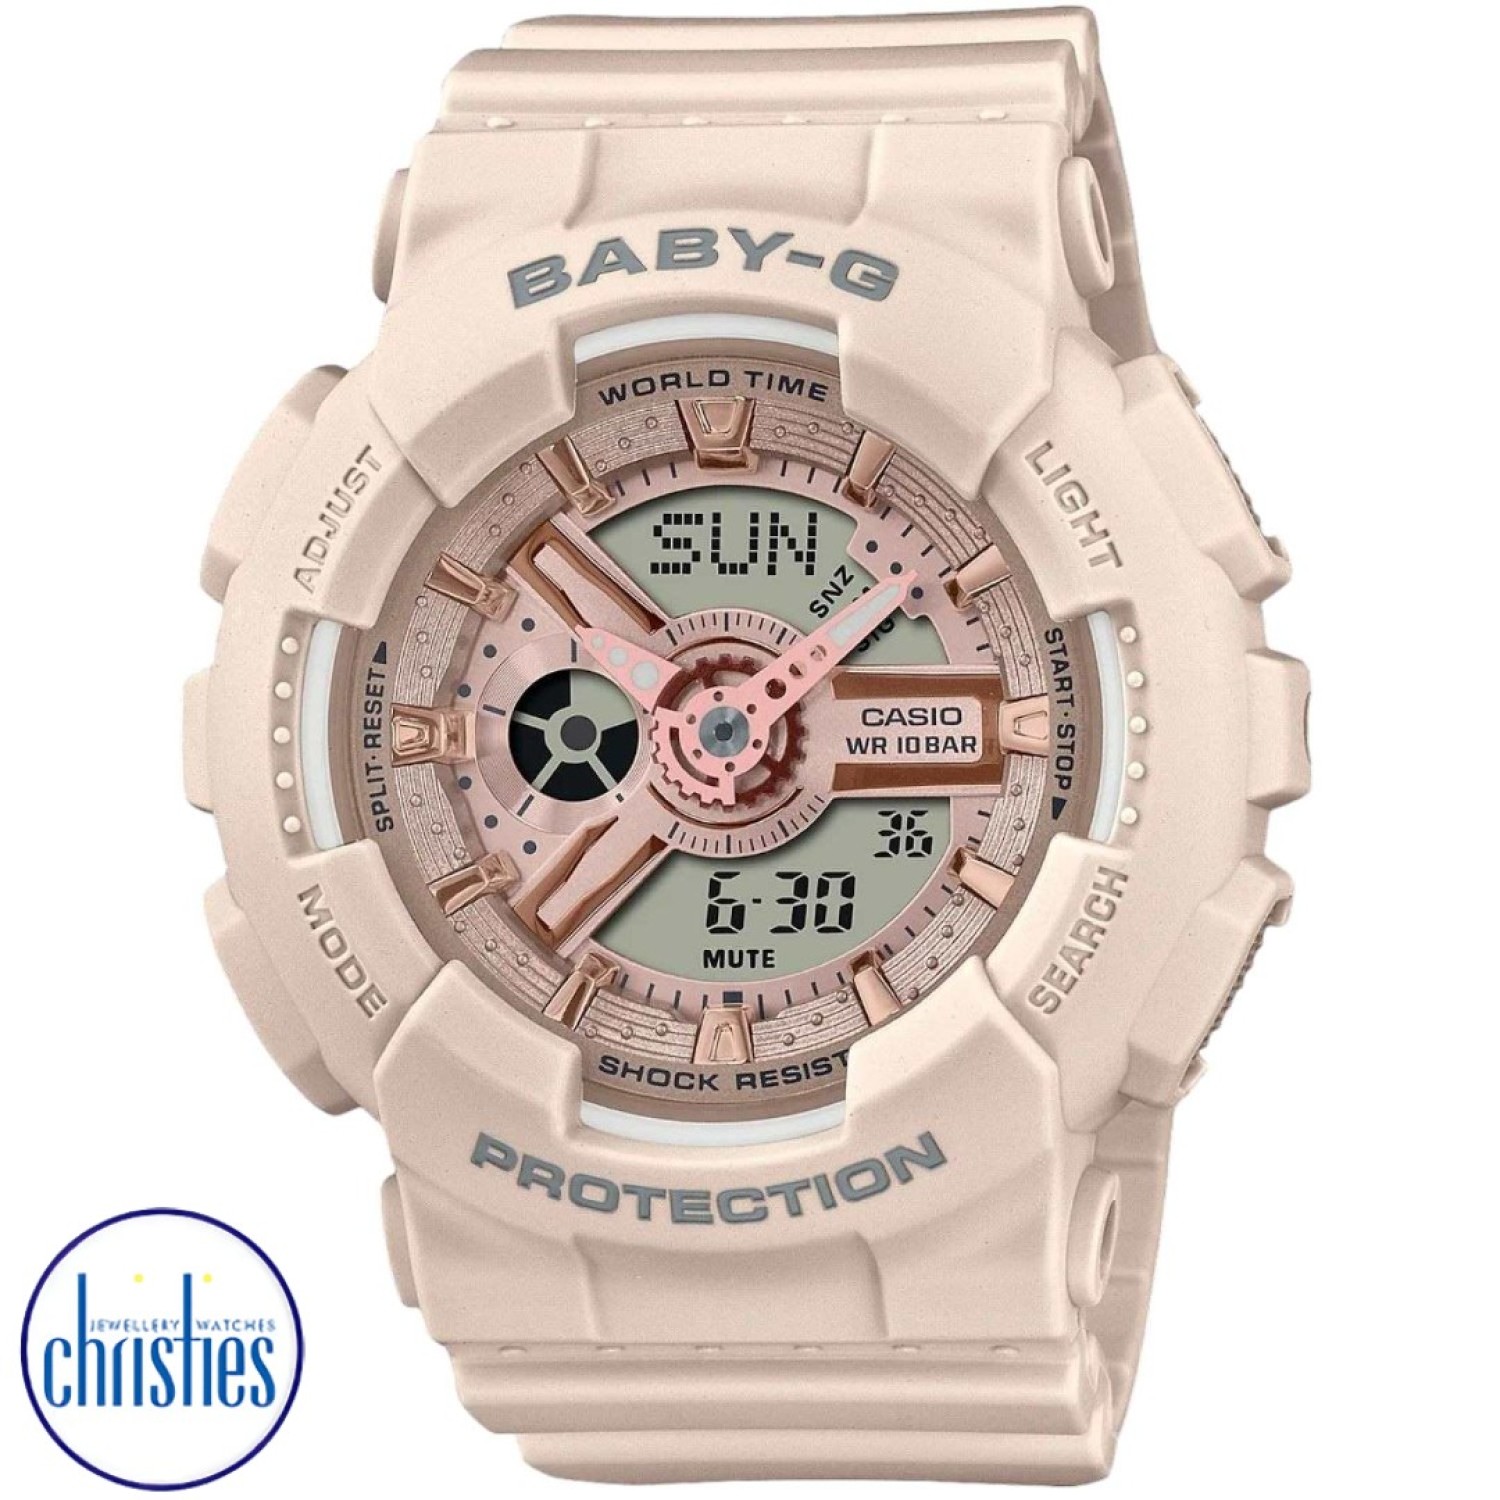 BA110XCP-4A Casio BABY-G Ana-Digi Watch. Slip on a splash of clean, fresh colour with an eye-catcher inspired by the popular design of the G-SHOCK GA-110. Baby-G watches price